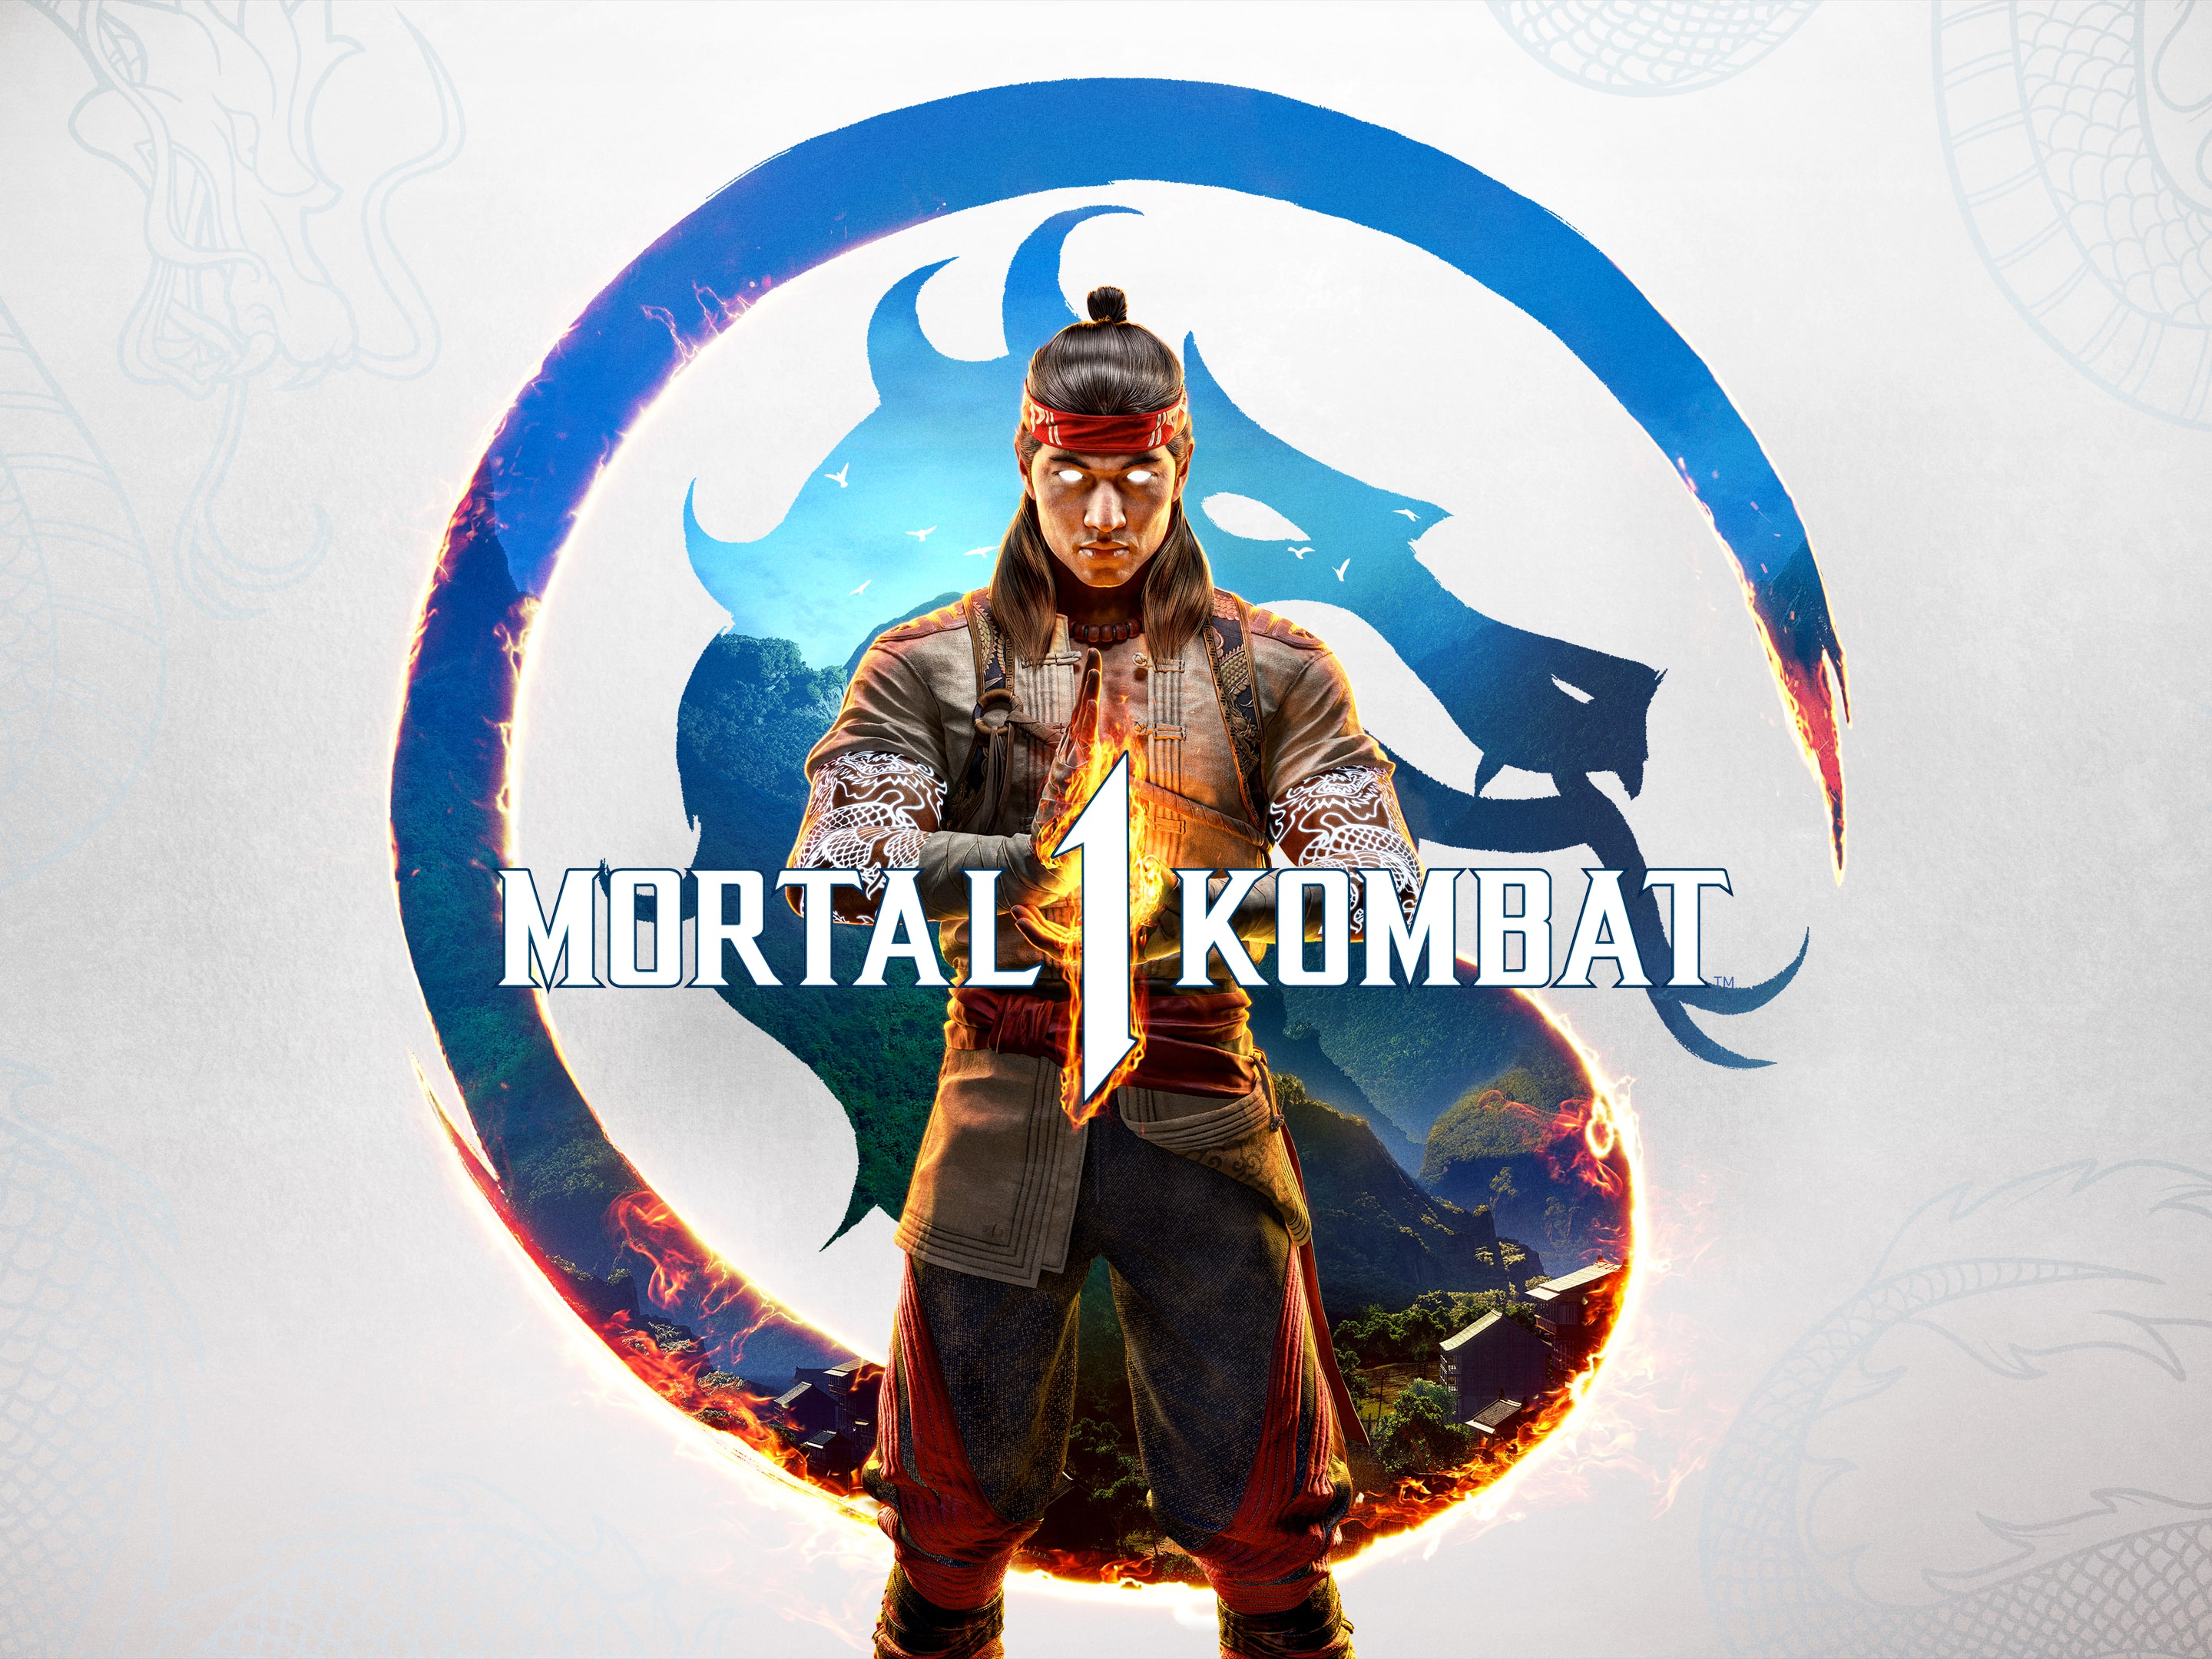 Mortal Kombat 4 ROM (ISO) Download for Sony Playstation / PSX 